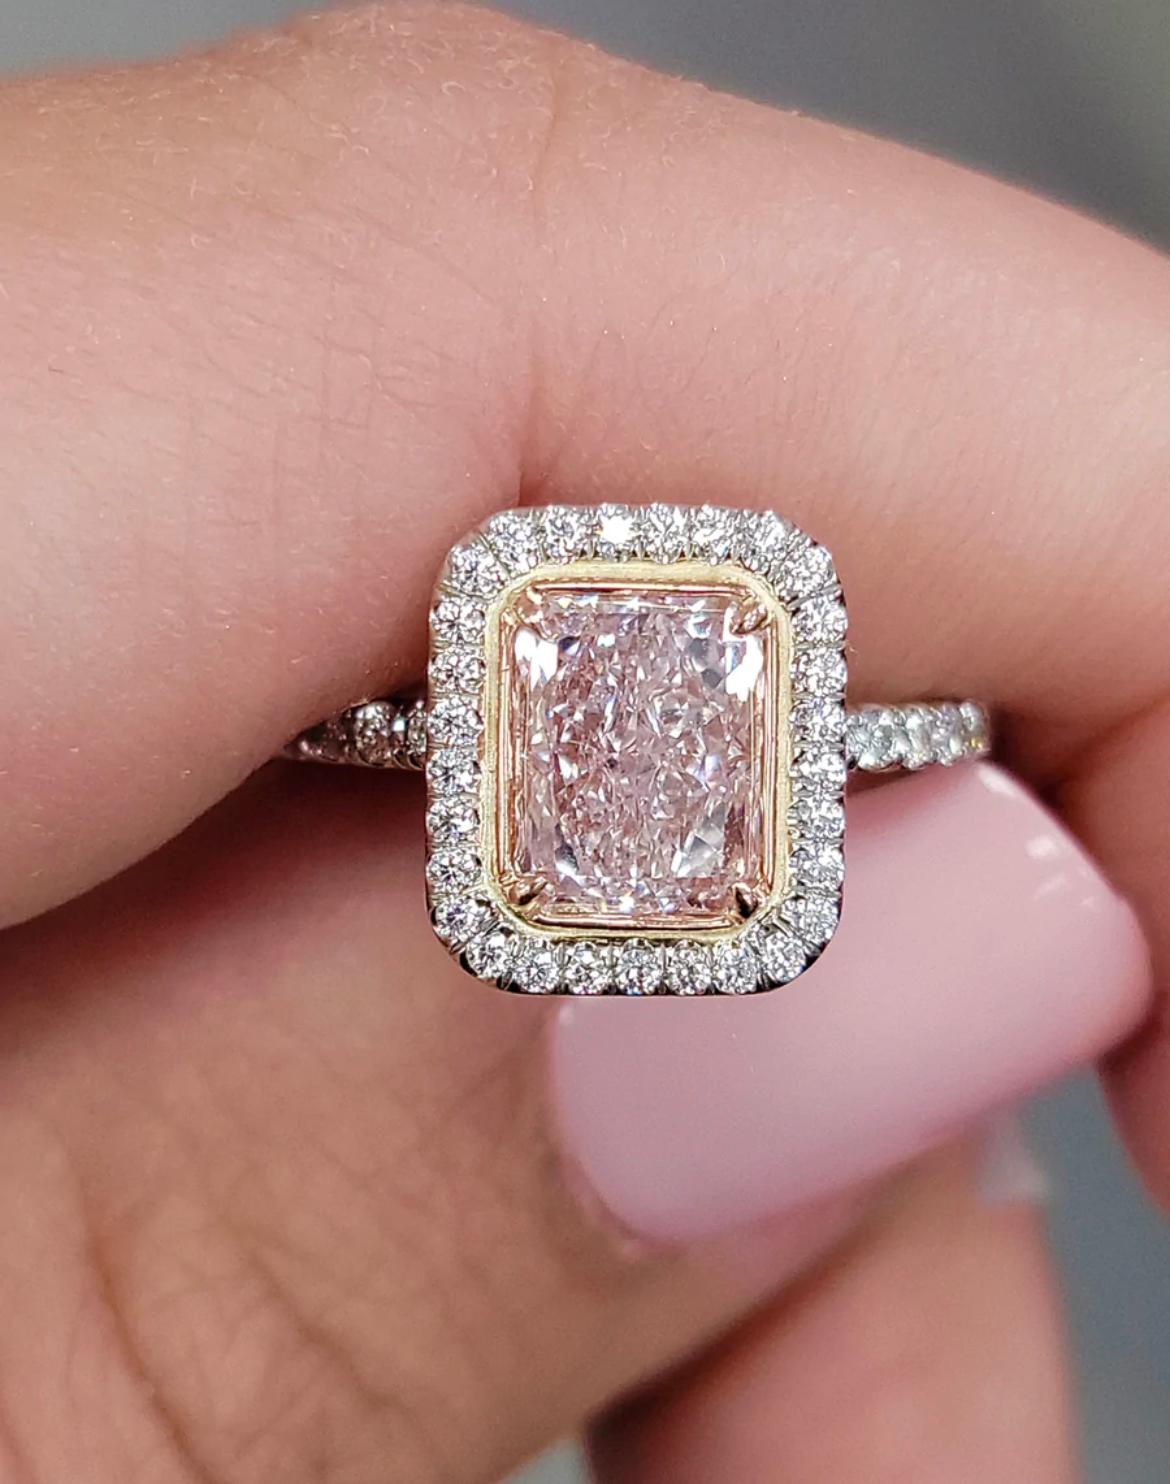 - Breathtaking 1.60ct Long Radiant certified as a “Very Light Pink, Internally Flawless”
- Has been set by our master jeweler into a custom impression of rose gold to maximize the color
- Platinum & Rose Gold in a double halo with 86pc 0.44ct of